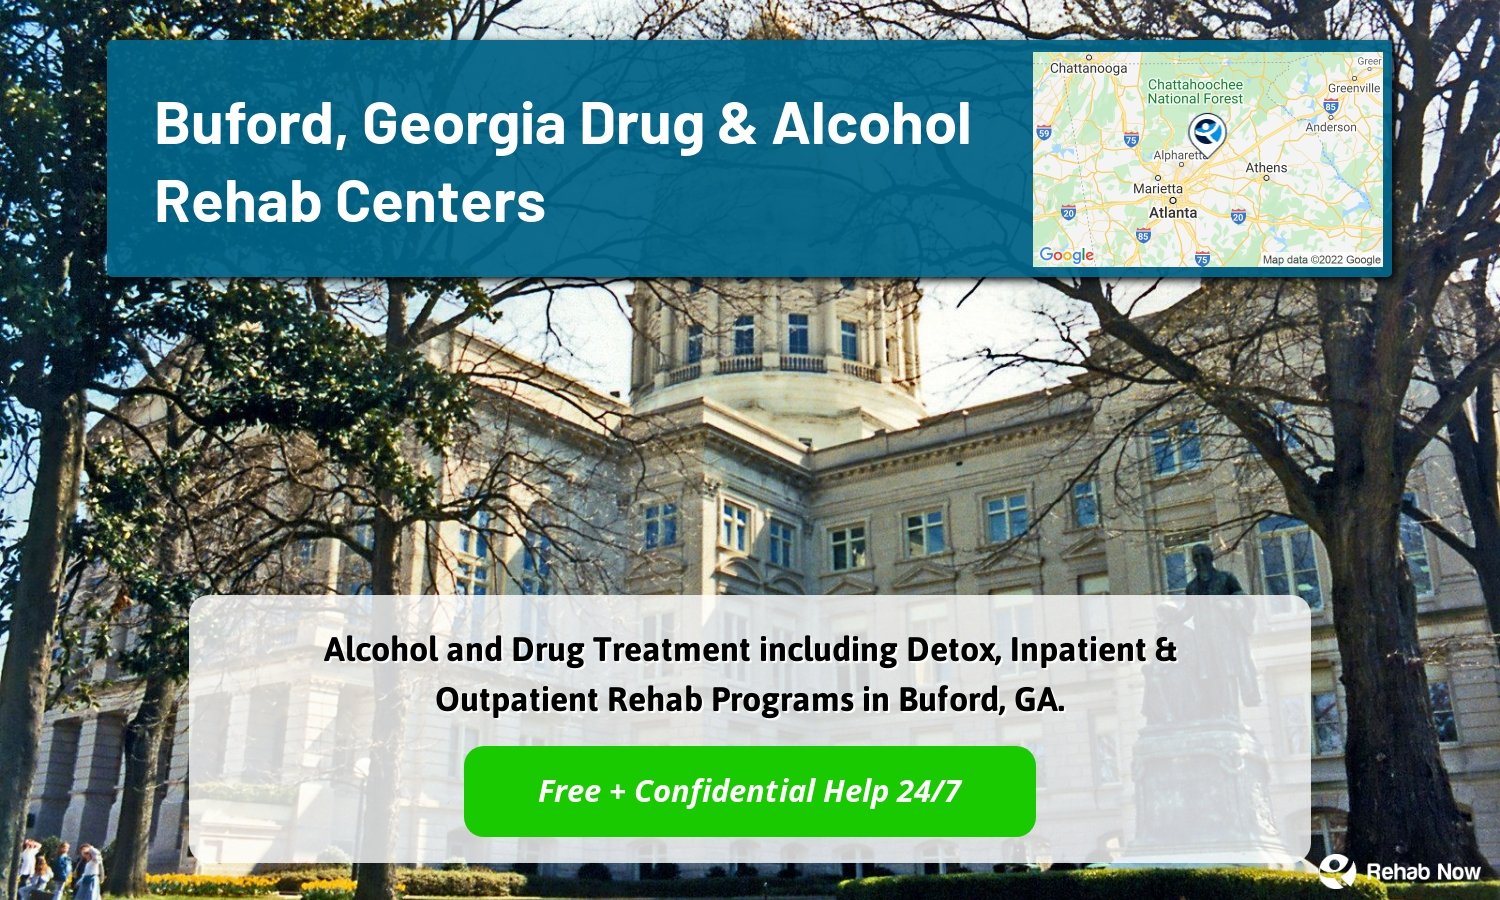 Alcohol and Drug Treatment including Detox, Inpatient & Outpatient Rehab Programs in Buford, GA.